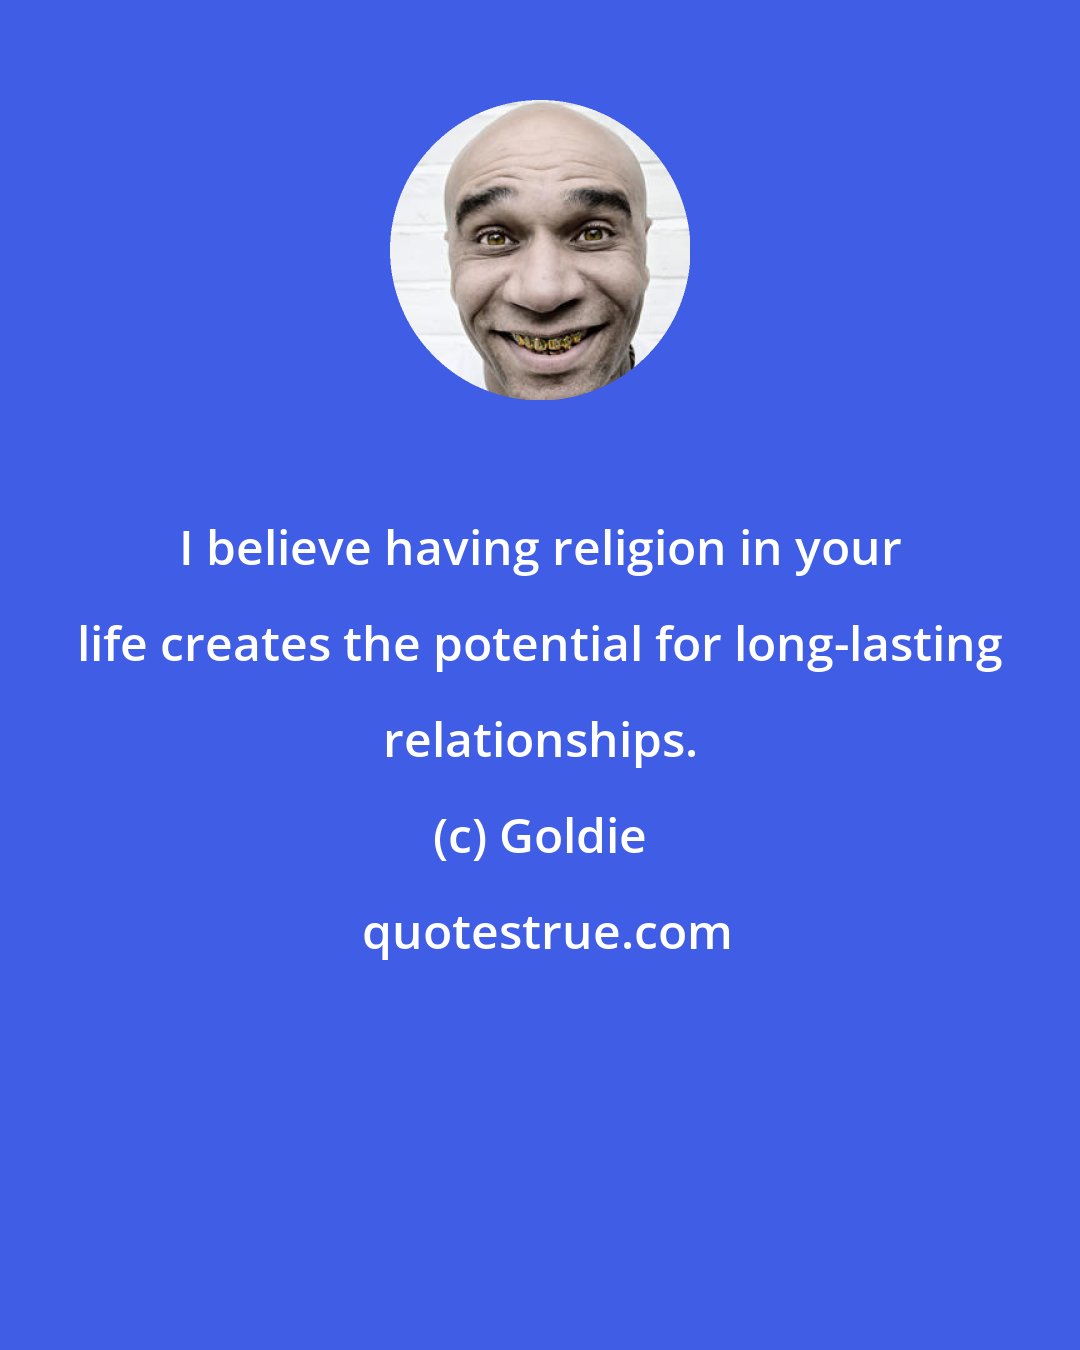 Goldie: I believe having religion in your life creates the potential for long-lasting relationships.